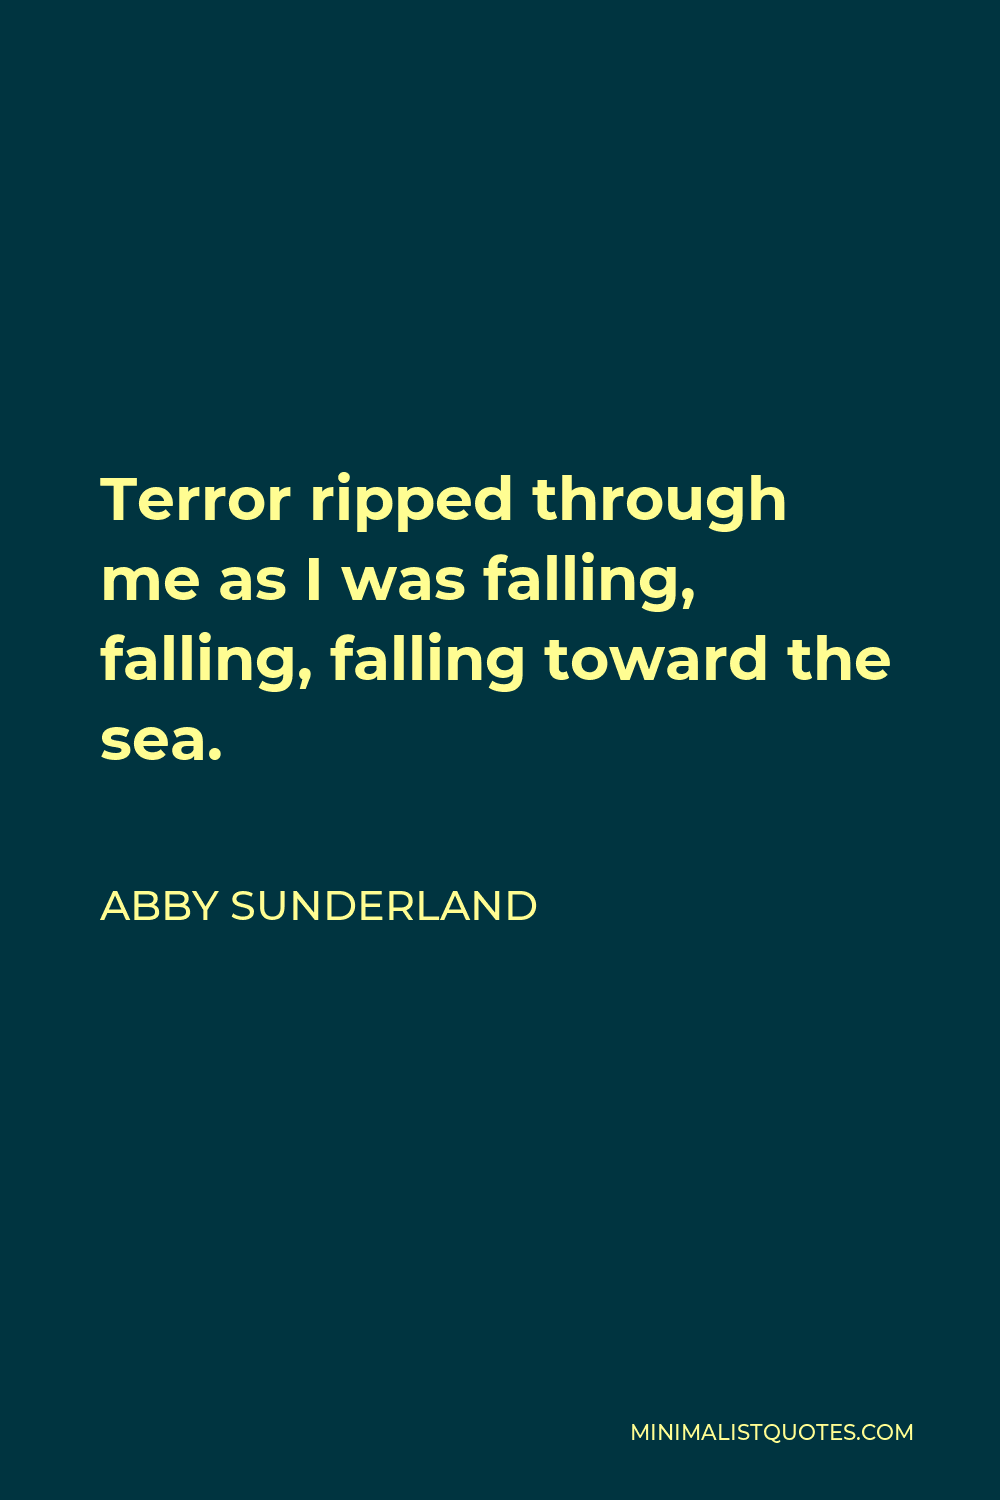 Abby Sunderland Quote - Terror ripped through me as I was falling, falling, falling toward the sea.